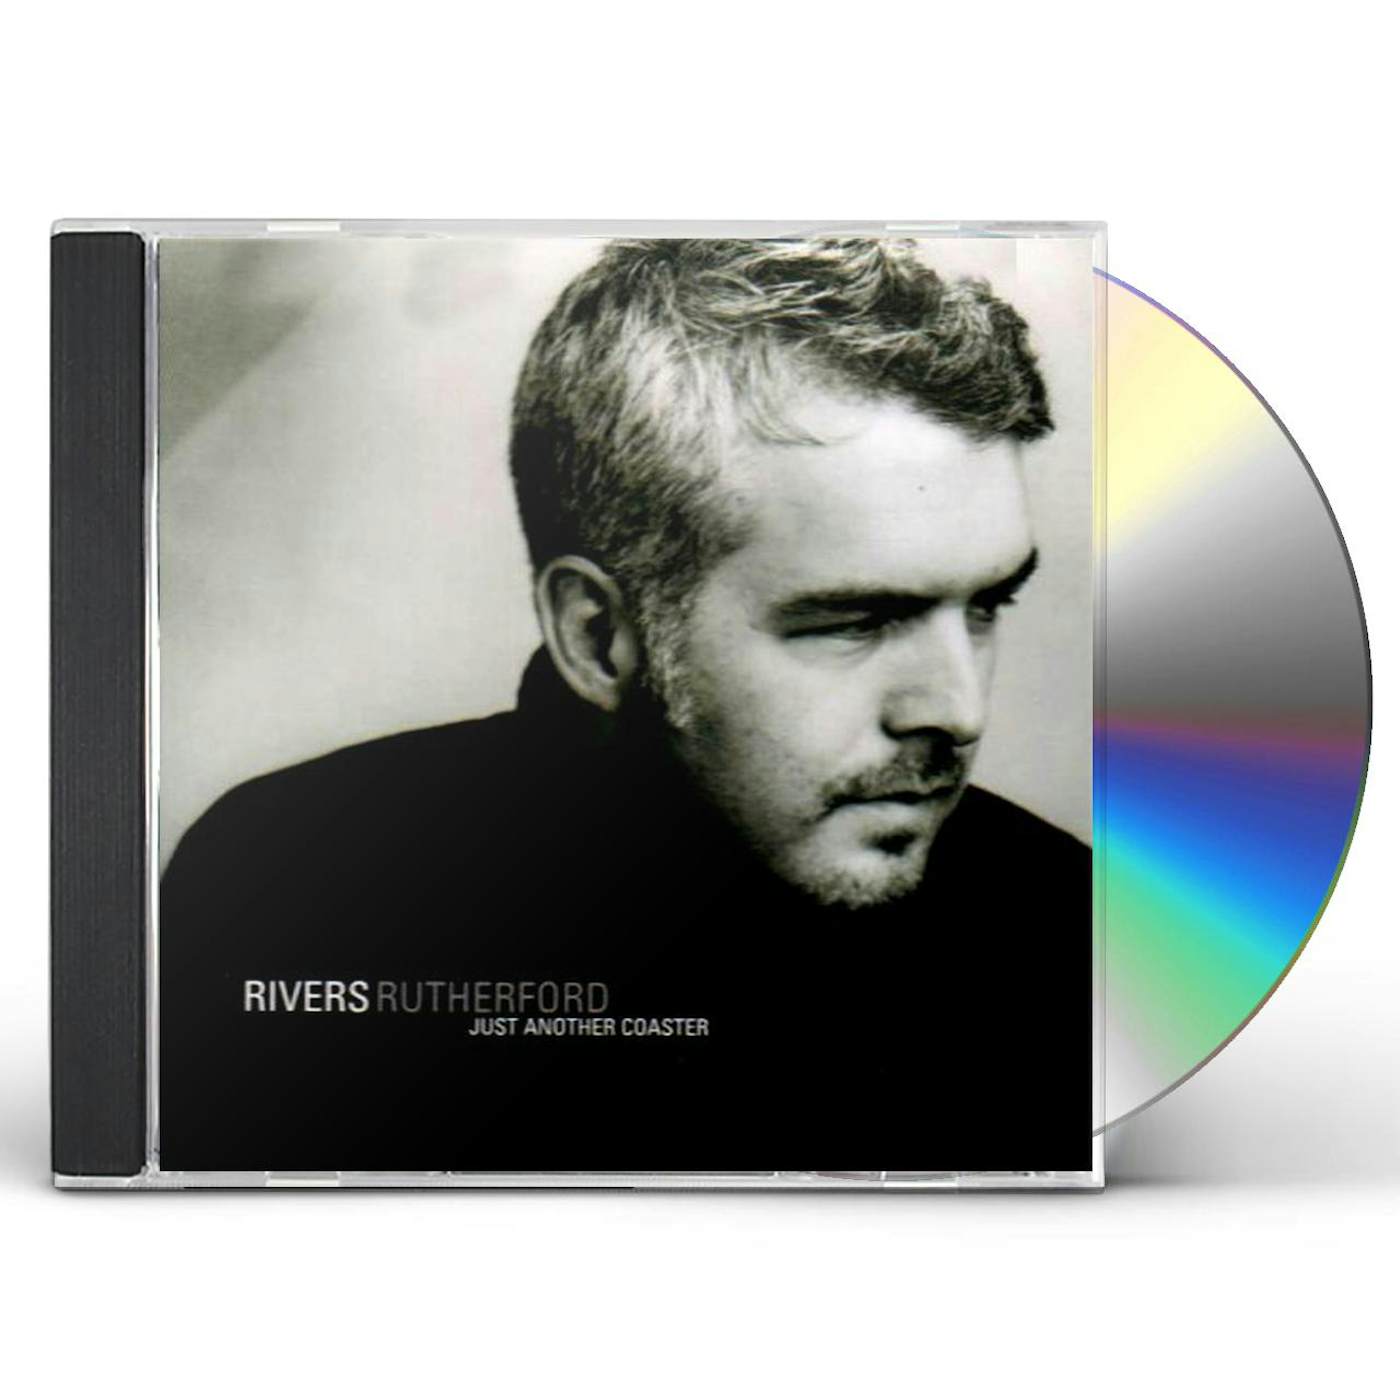 Rivers Rutherford JUST ANOTHER COASTER CD